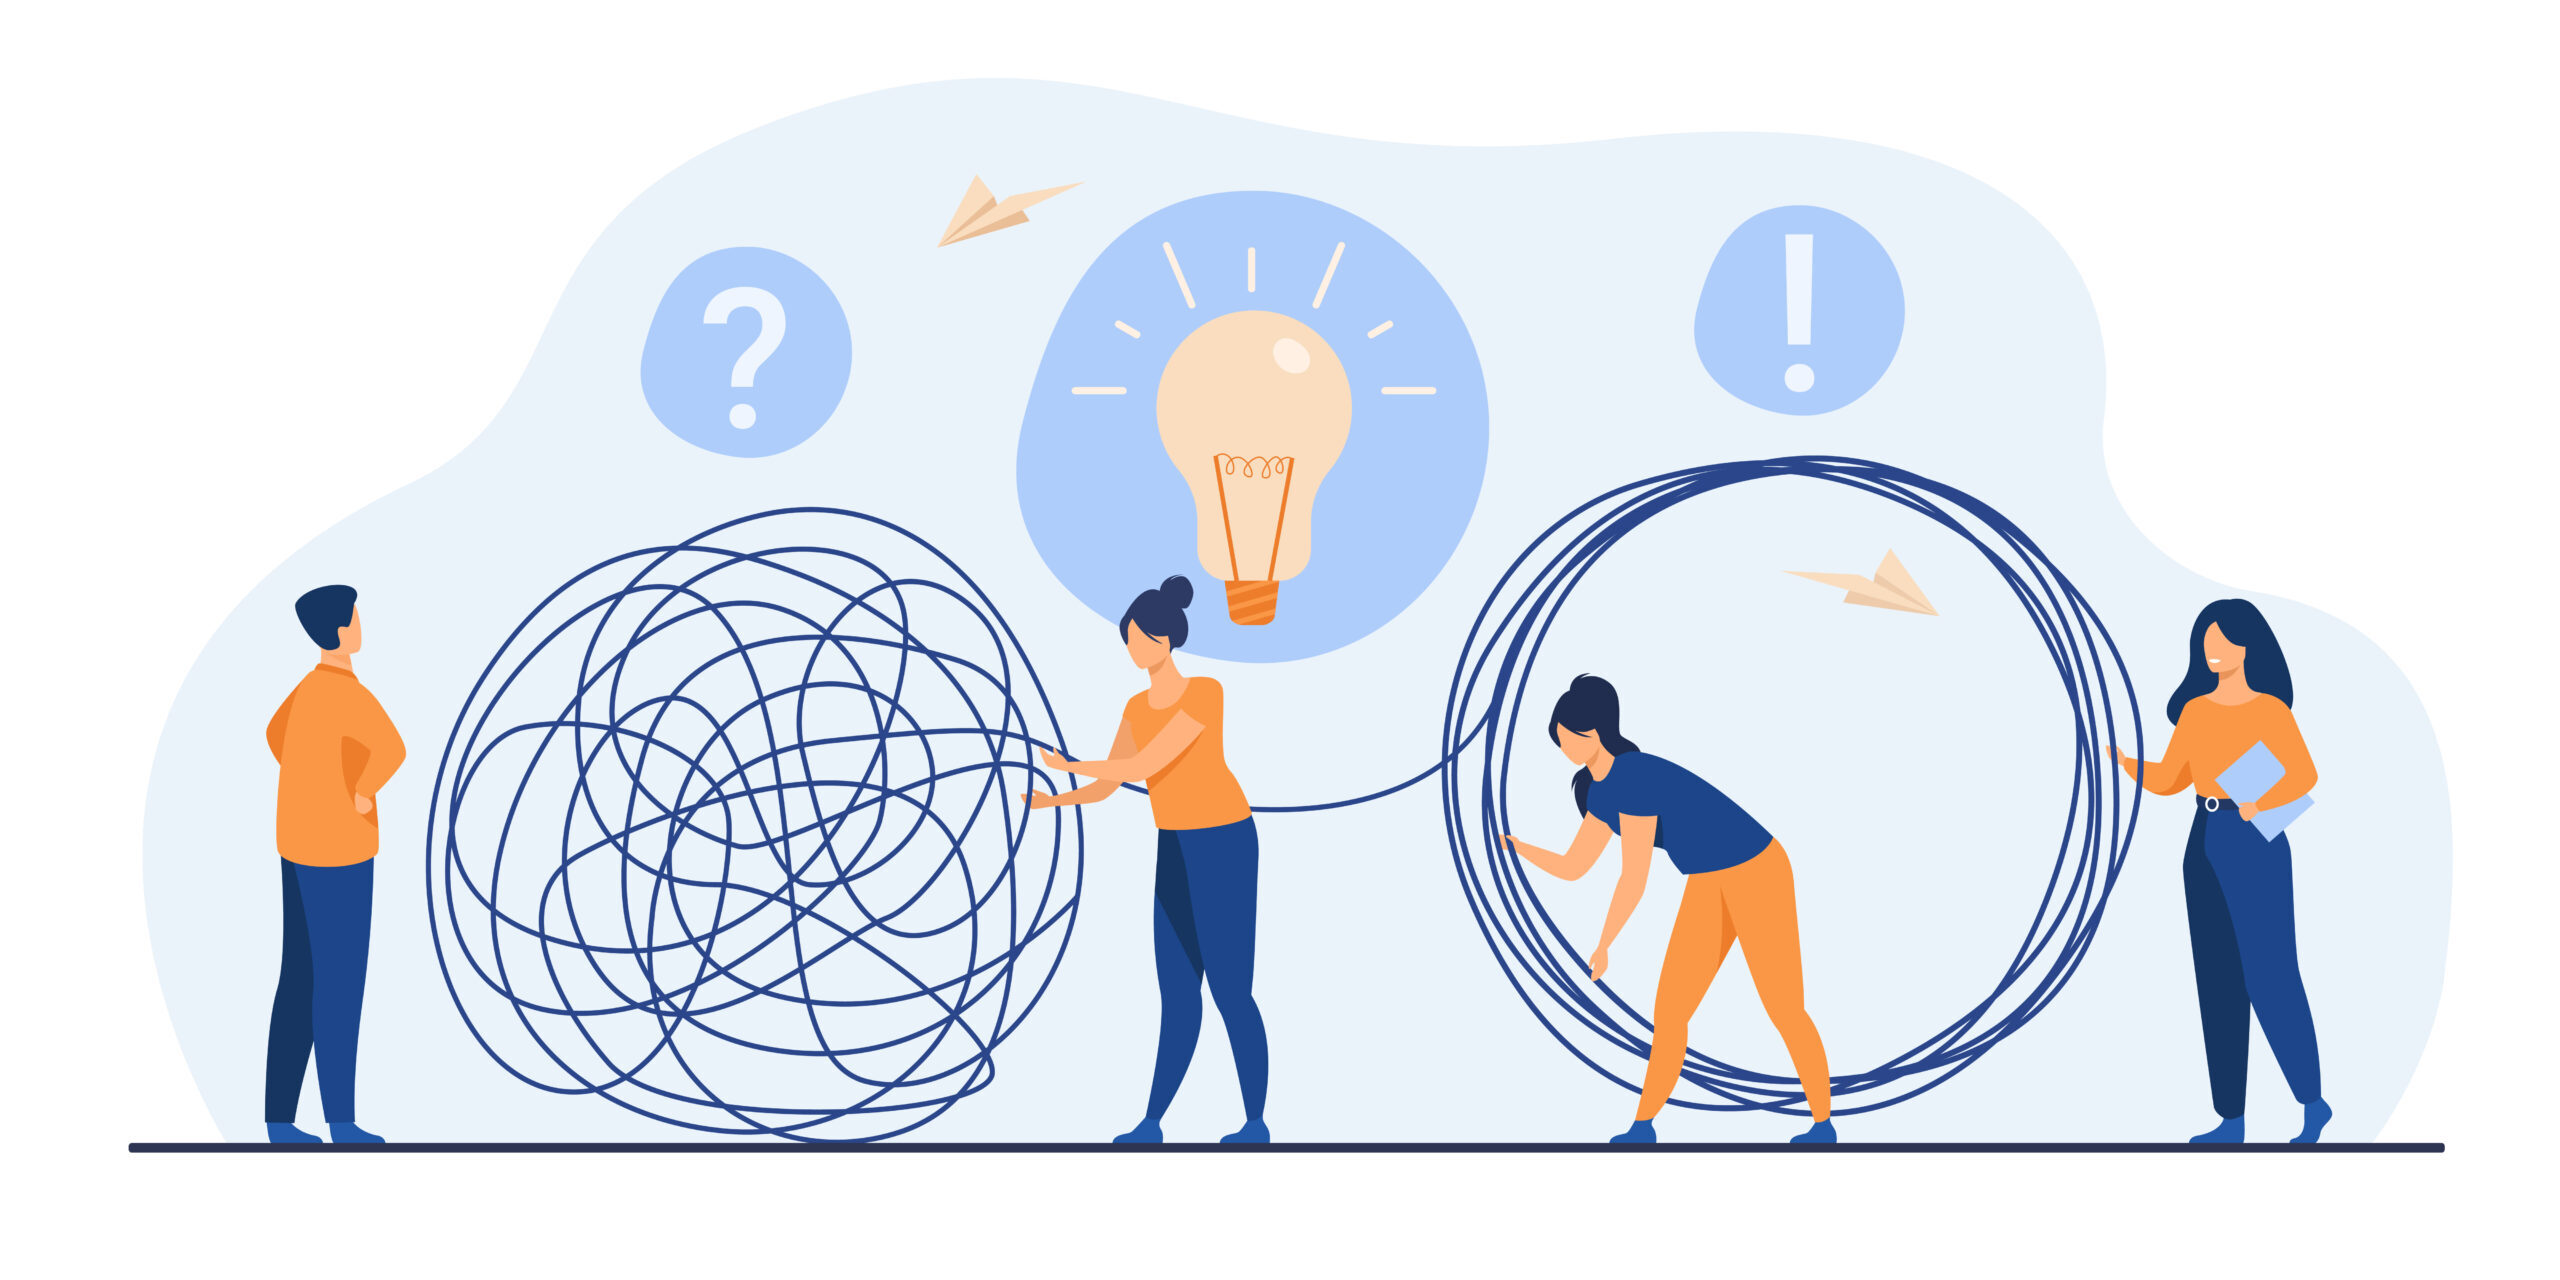 Team of crisis managers solving businessman problems. Employees with lightbulb unraveling tangle. Vector illustration for teamwork, solution, management concept